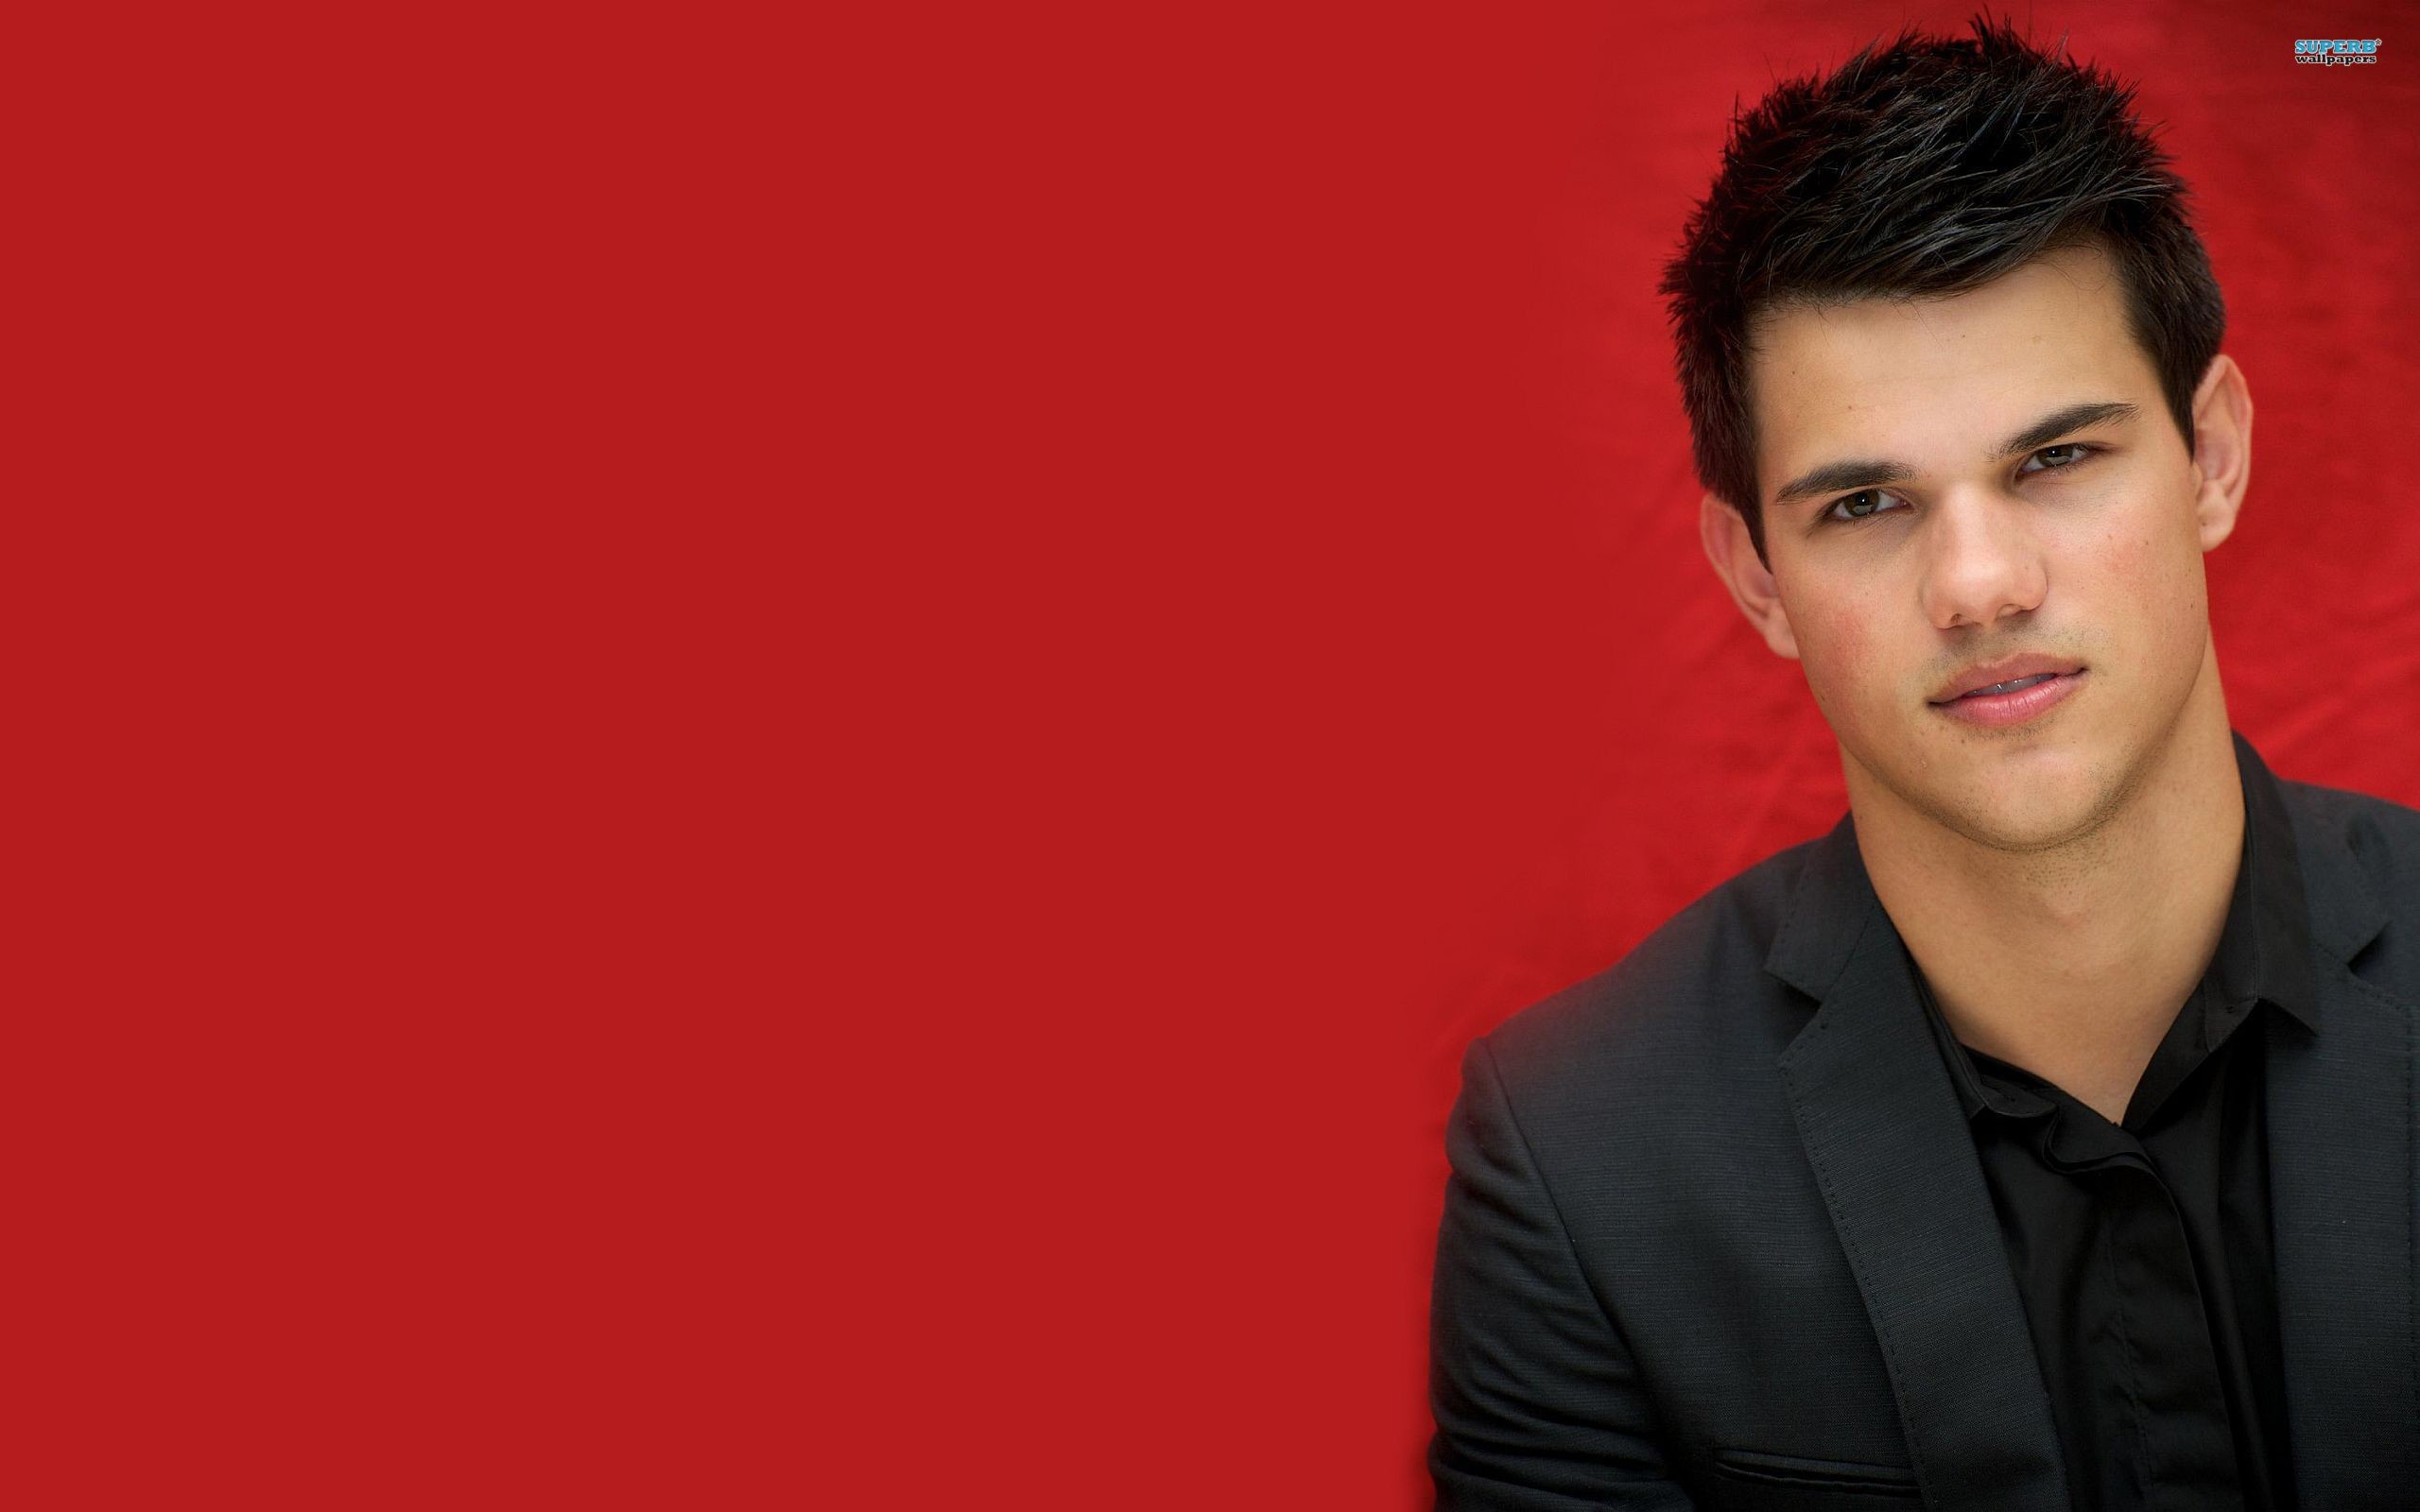 2560x1600 Taylor Lautner Wallpapers For Computer - Wallpaper Cave